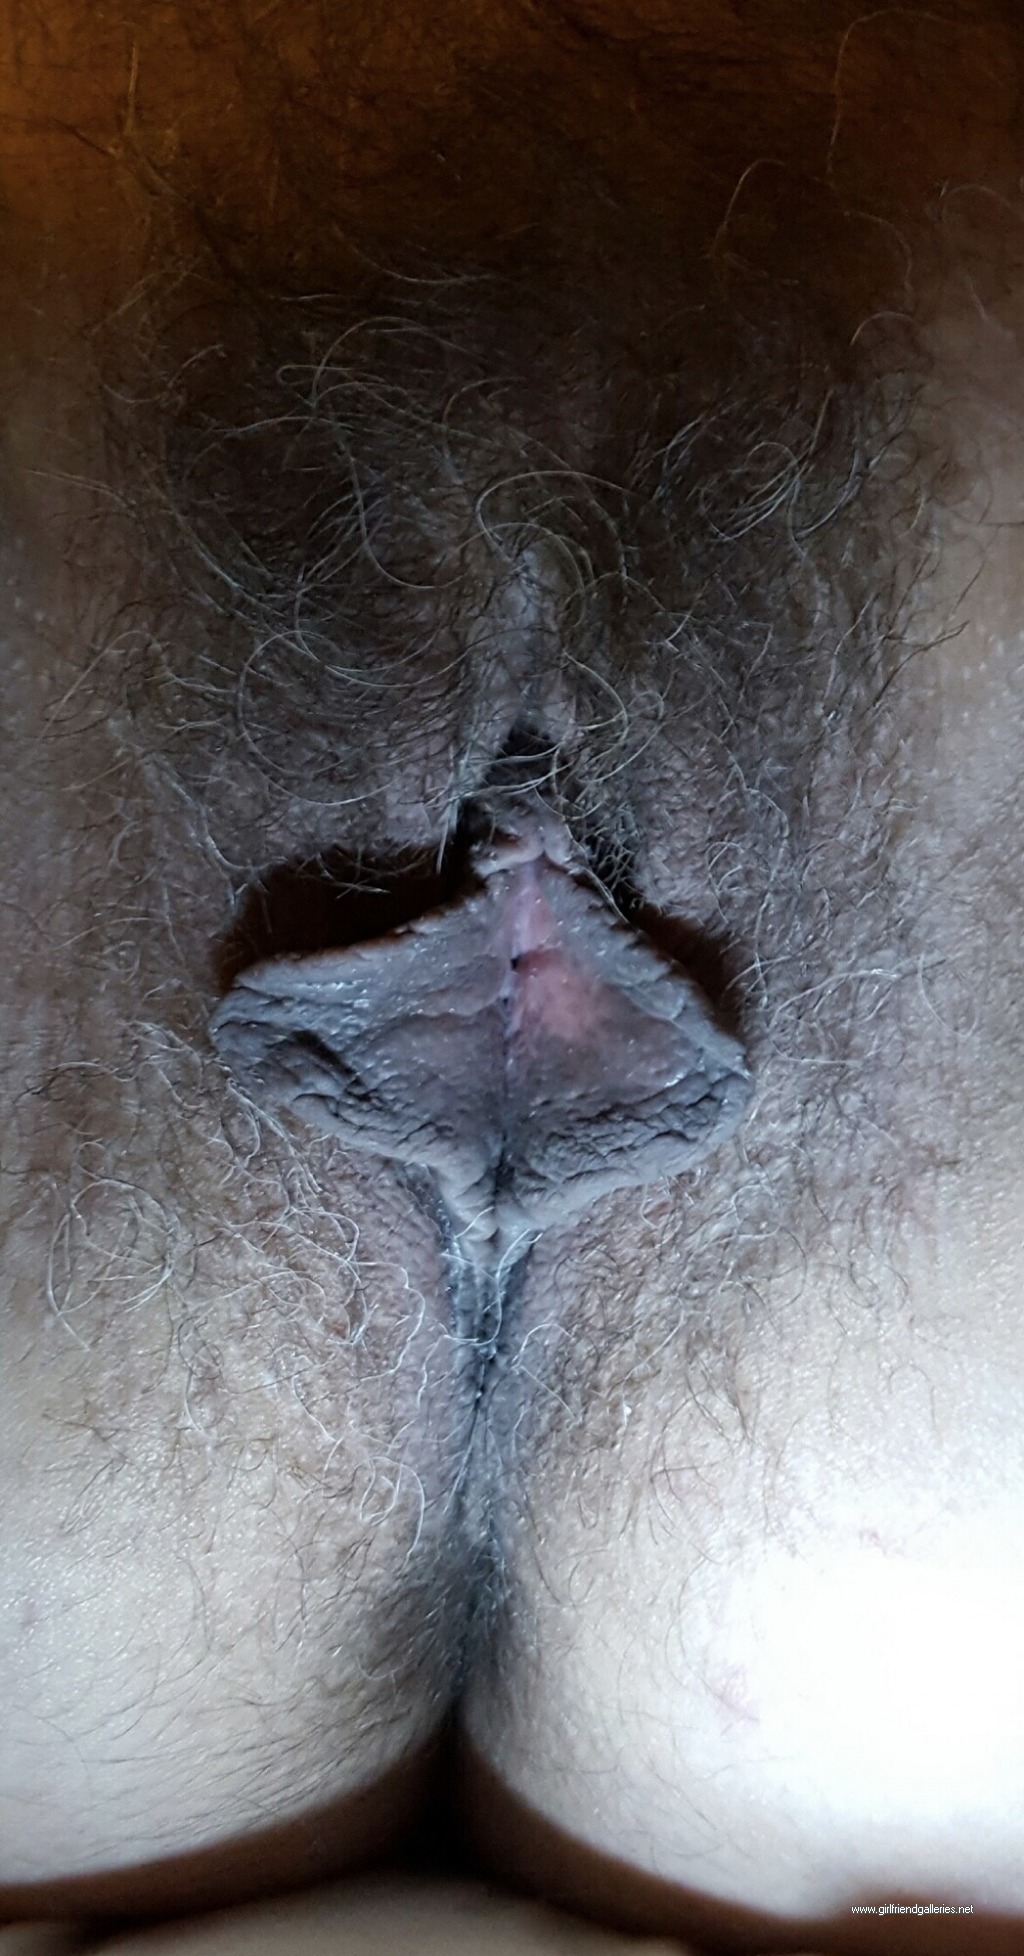 Milf Wife’s well used hairy meaty cunt